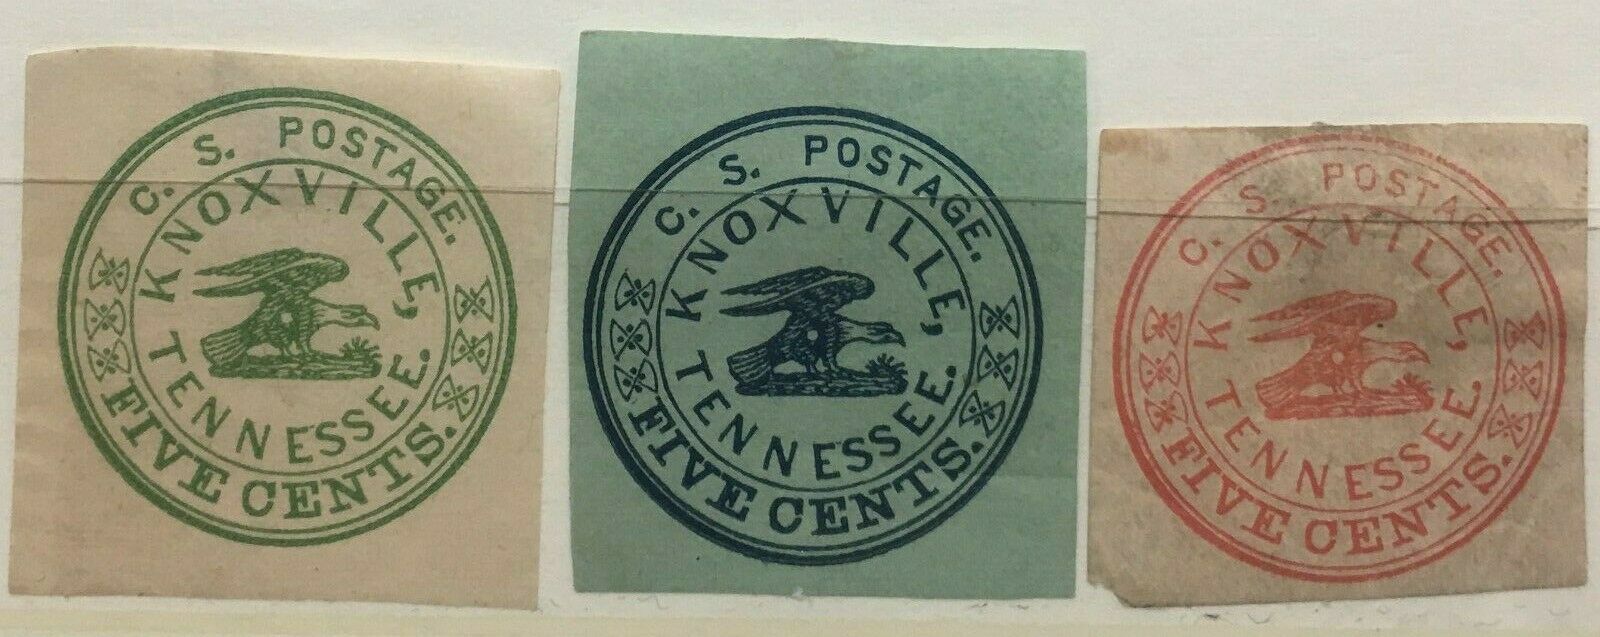 C.s. Postage Us Local Post Bogus, Fakes, Forgeries And Reprint Stamps